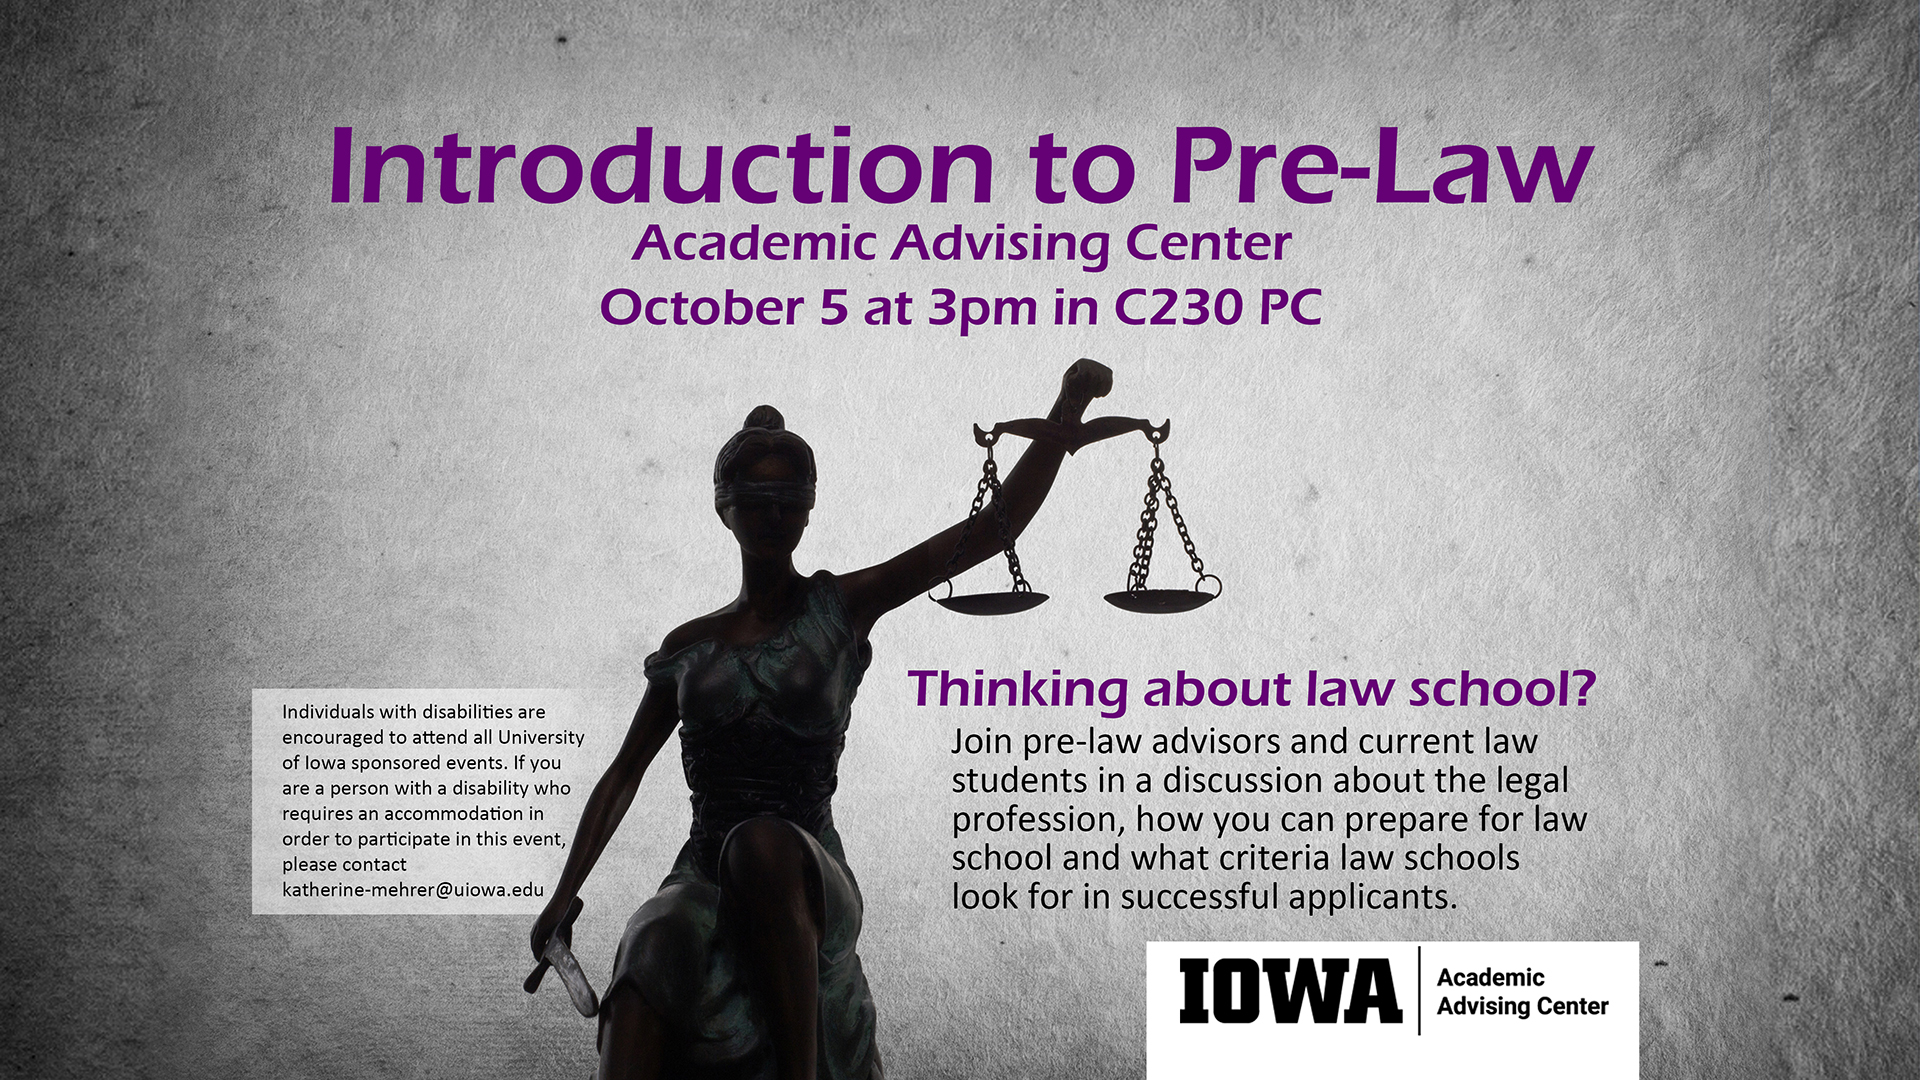 Statue of the goddess of justice with gray background, Purple/Black text: “Introduction to Pre-Law/ Academic Advising Center/ October 5 at 3pm in C230 PC / Thinking about law school?